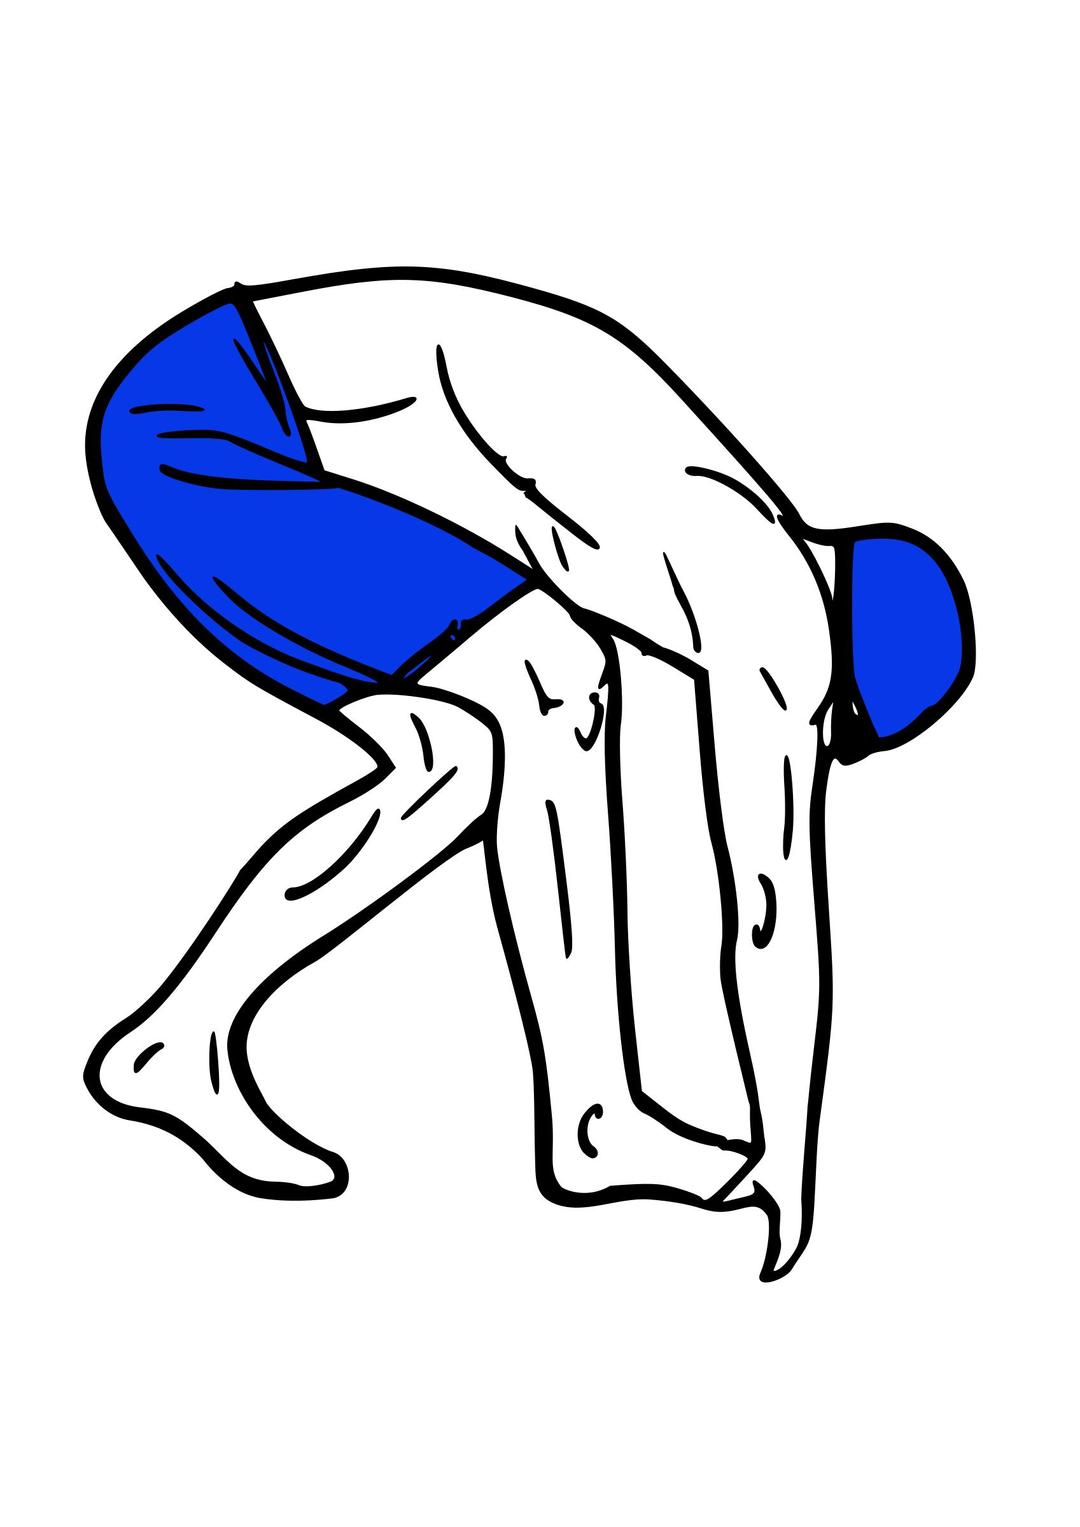 Swimmer on the Blocks png transparent